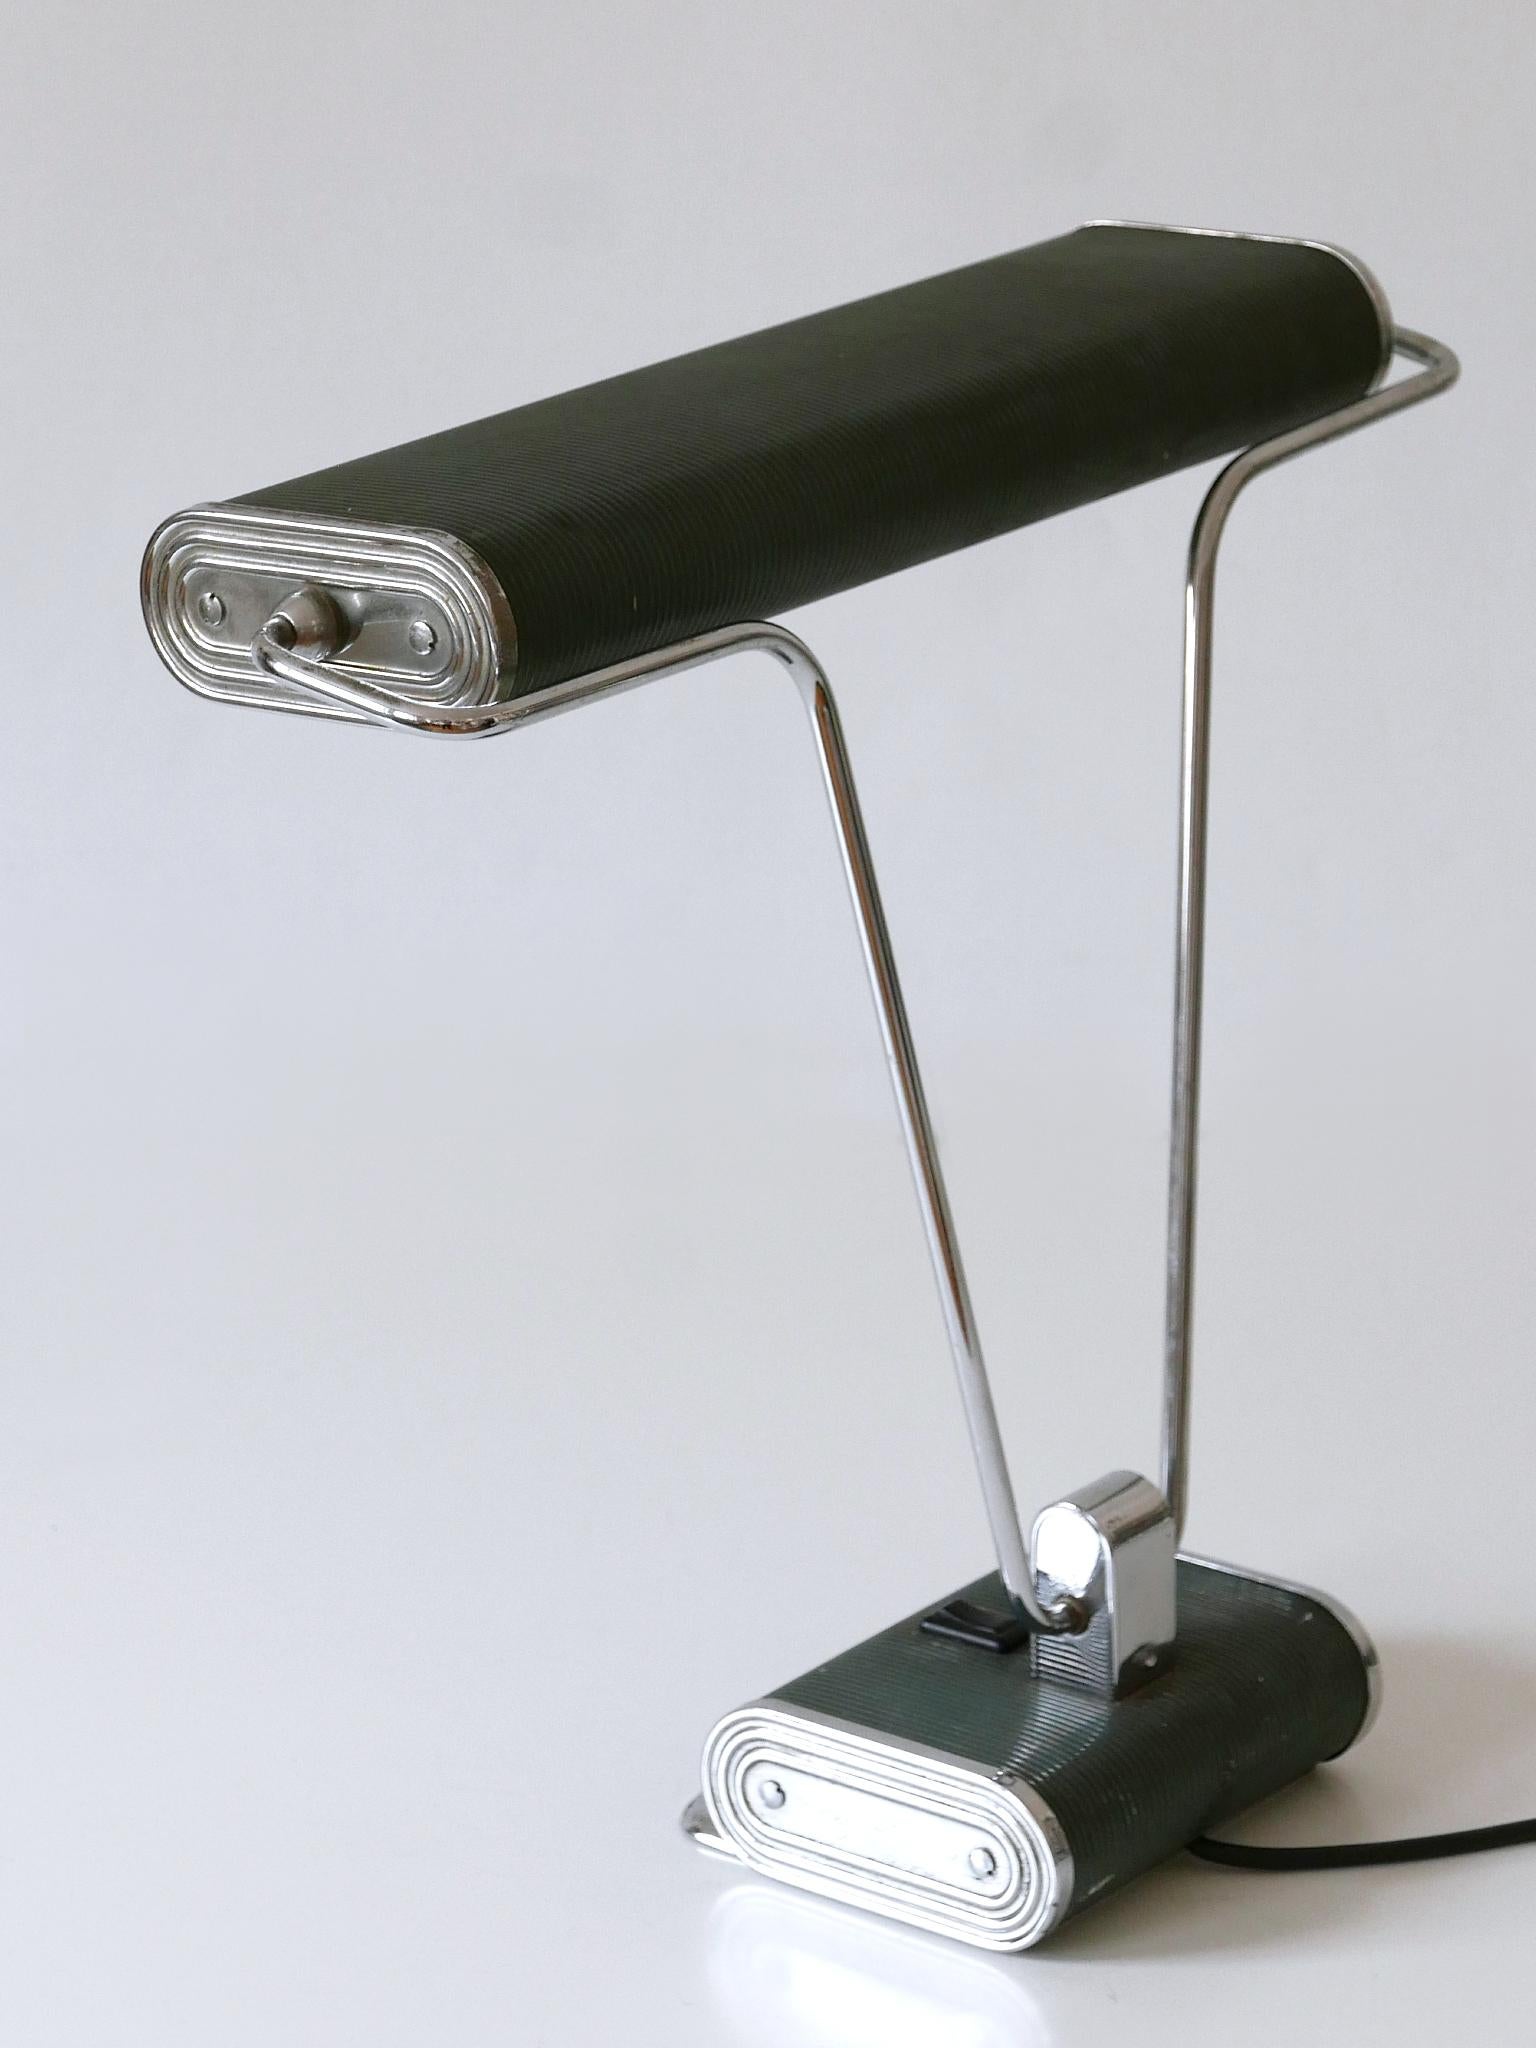 Plated Art Deco Table Lamp or Desk Light 'No 71' by André Mounique for Jumo 1930s For Sale